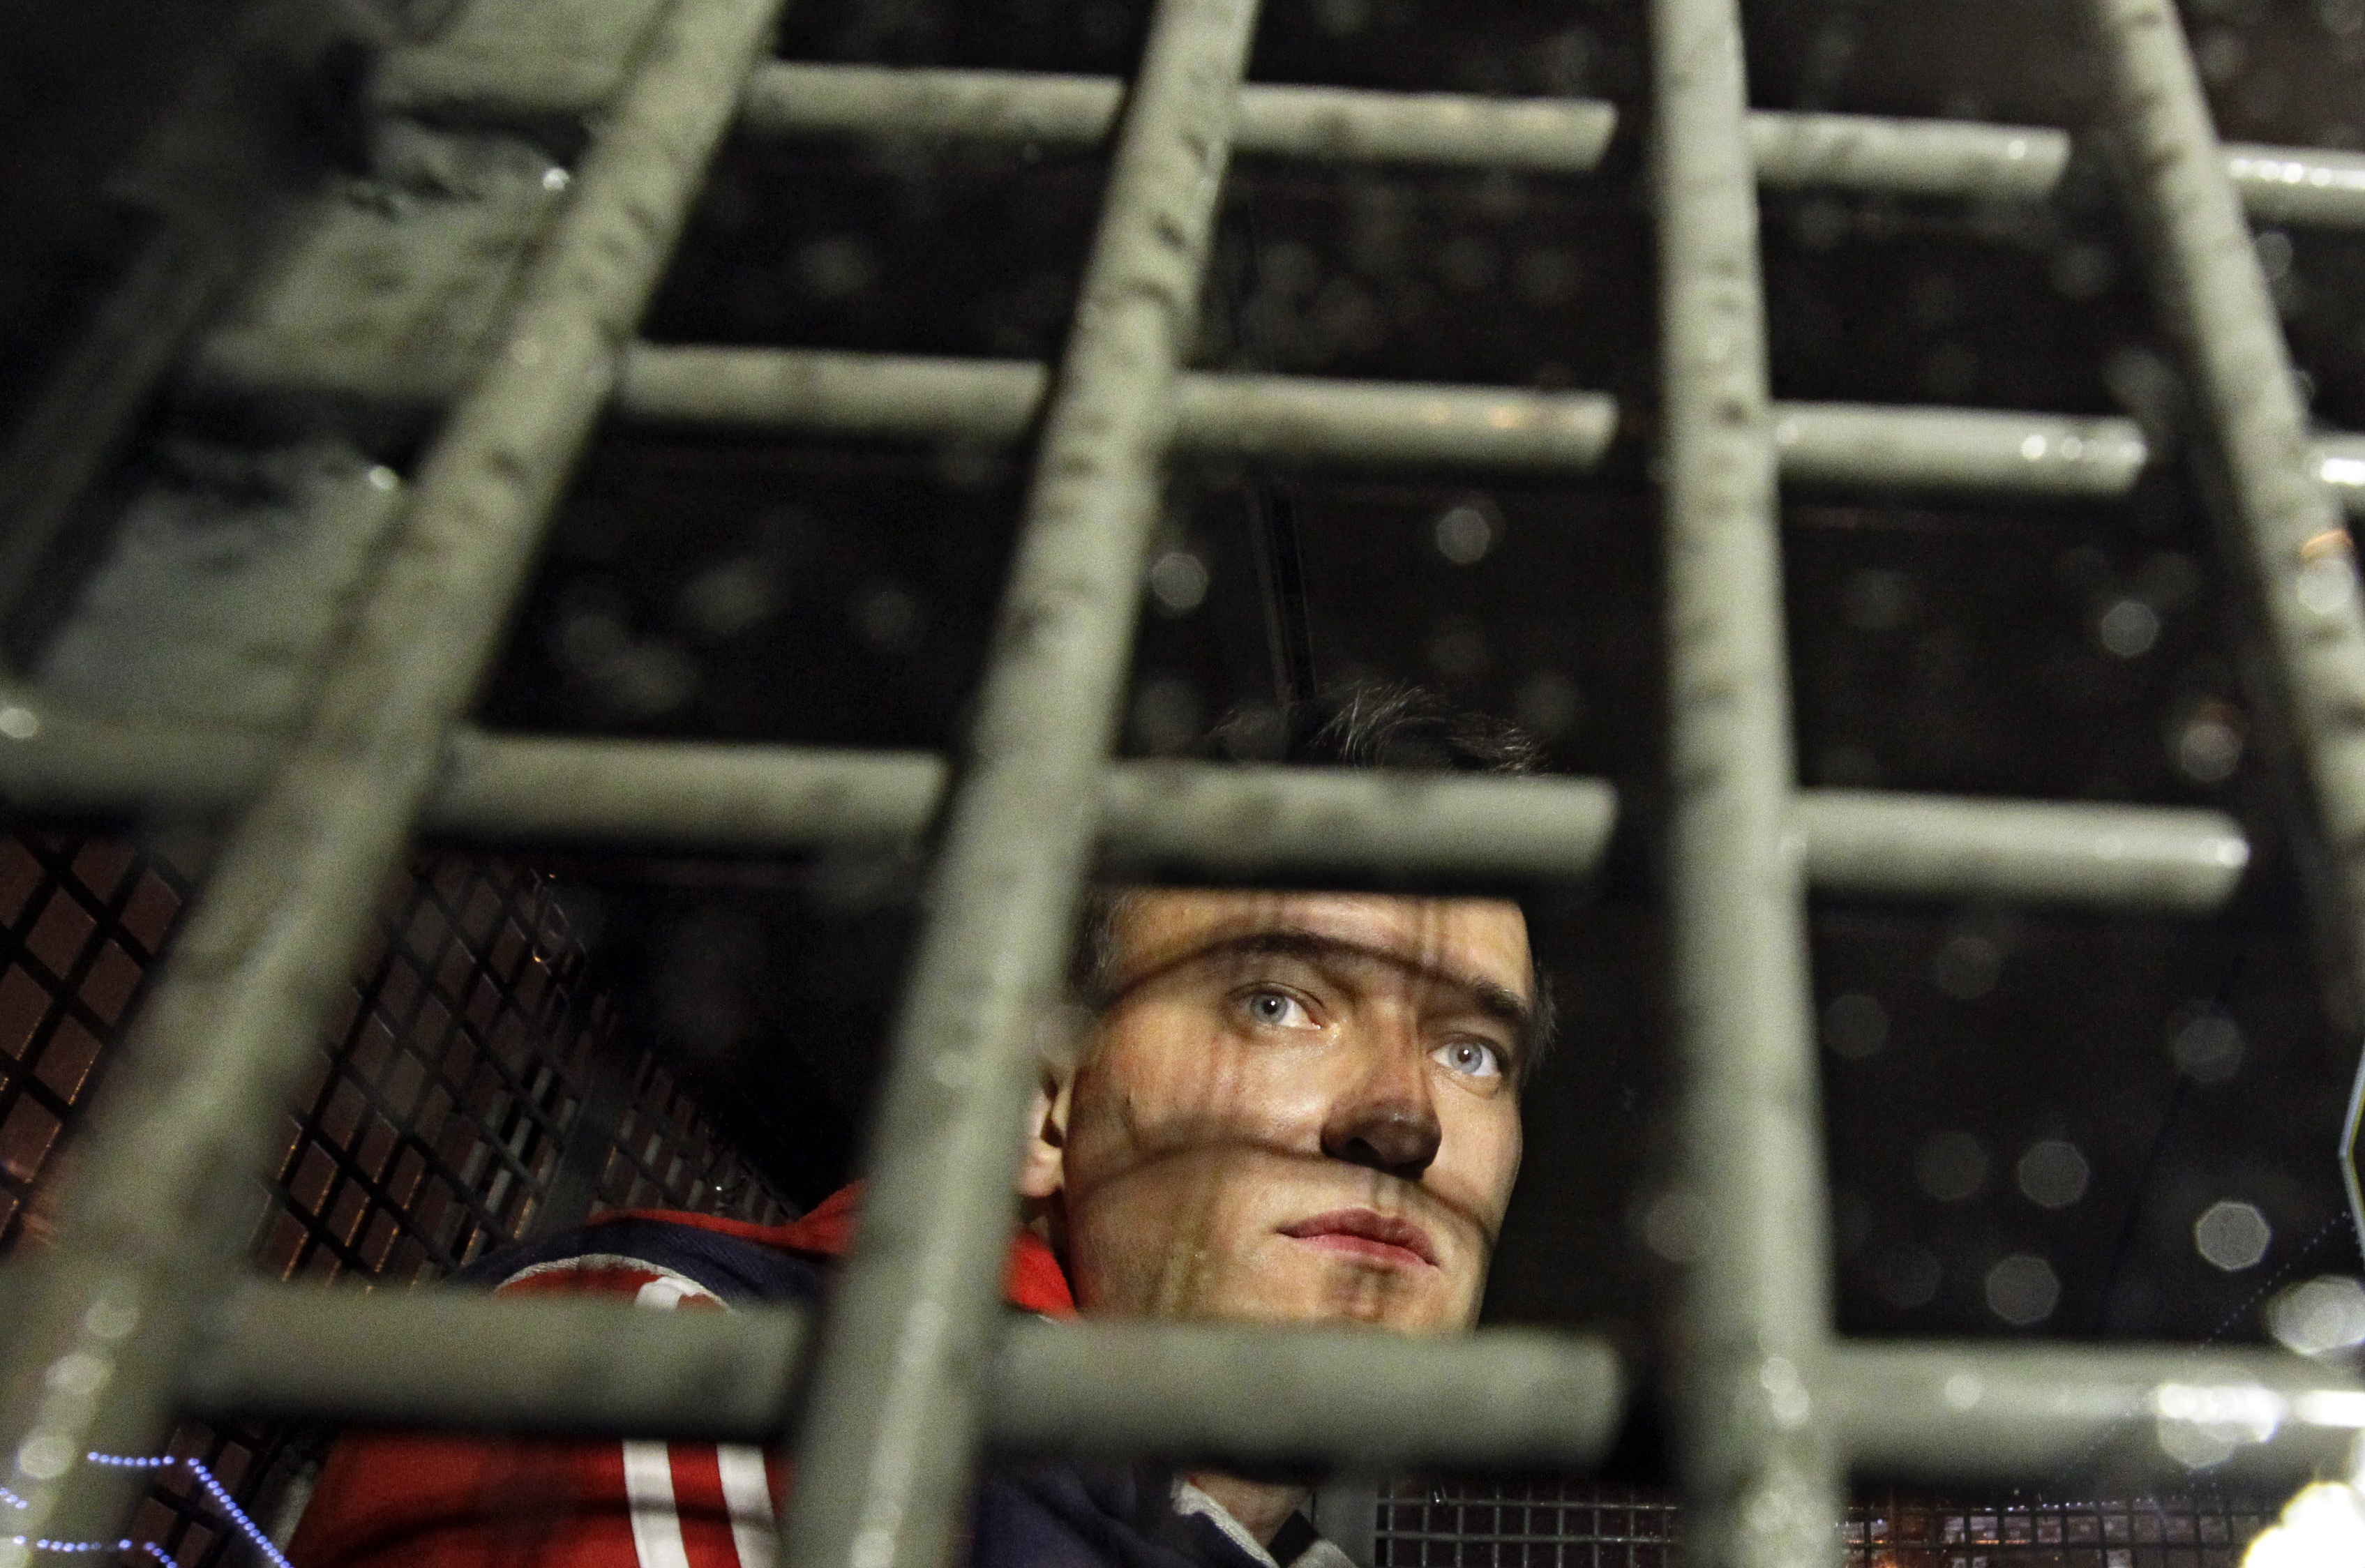 Alexey Navalny is seen behind the bars of a police van in Moscow after he was detained during protests in 2012.